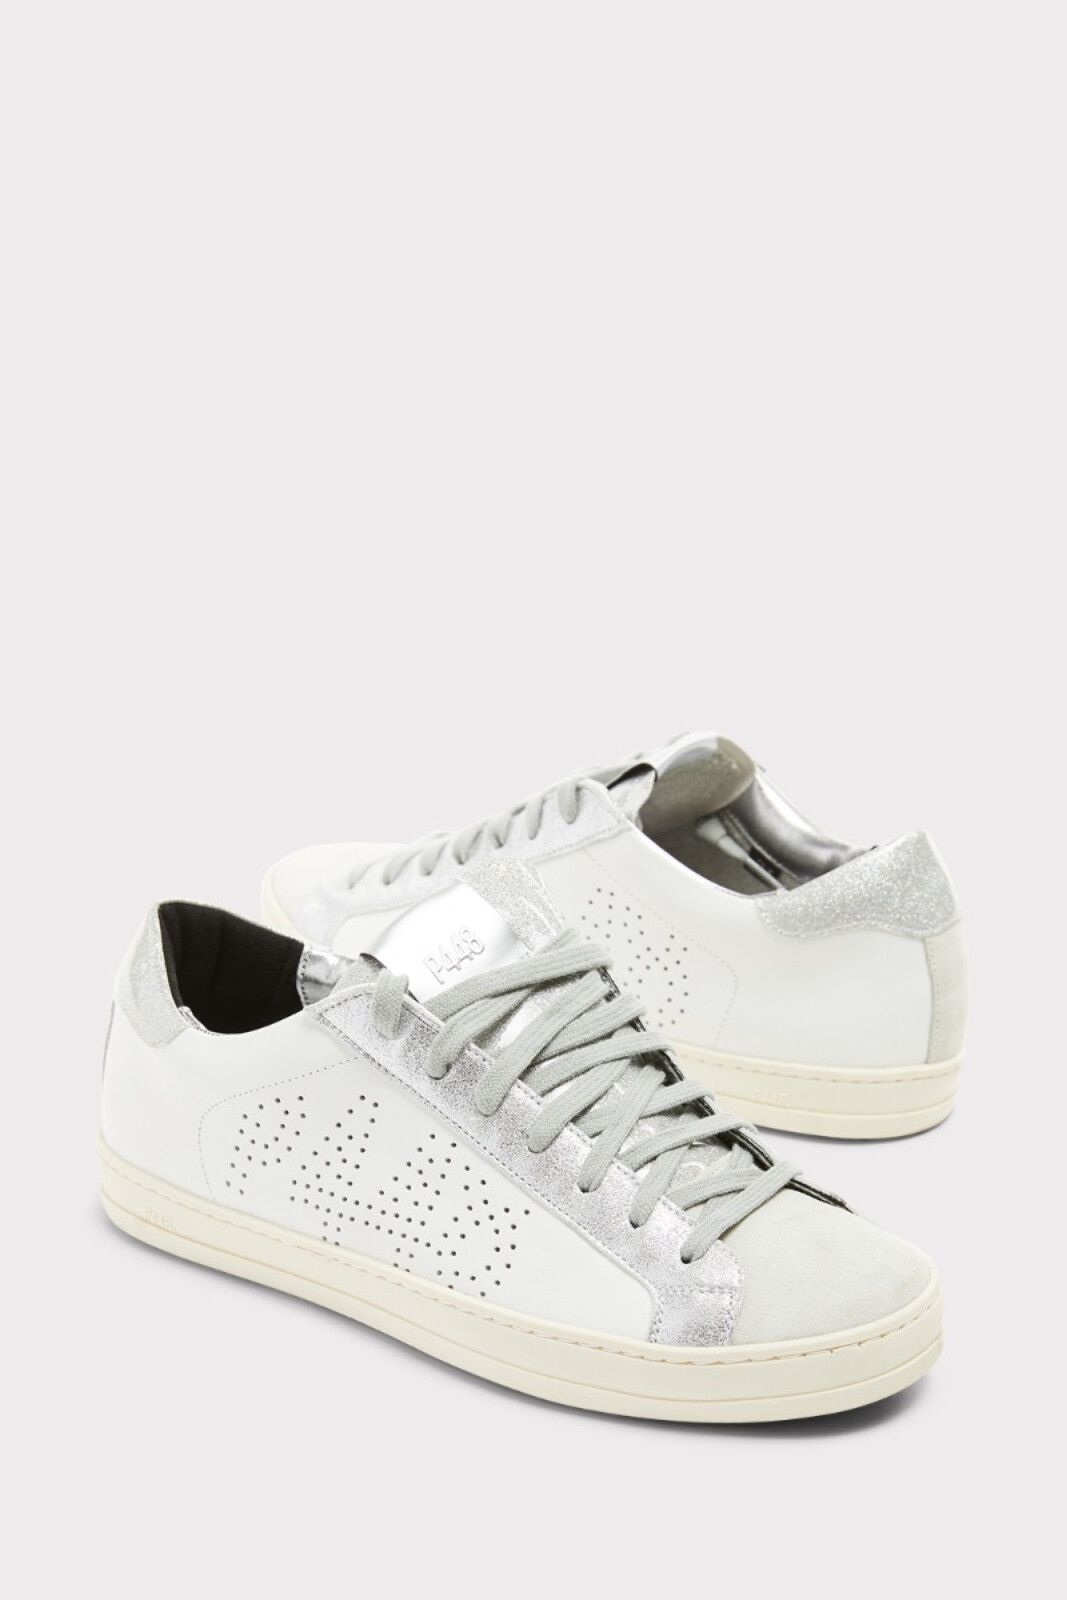 P448 Women's Thea Lace-Up Low-Top Sneakers - Macy's